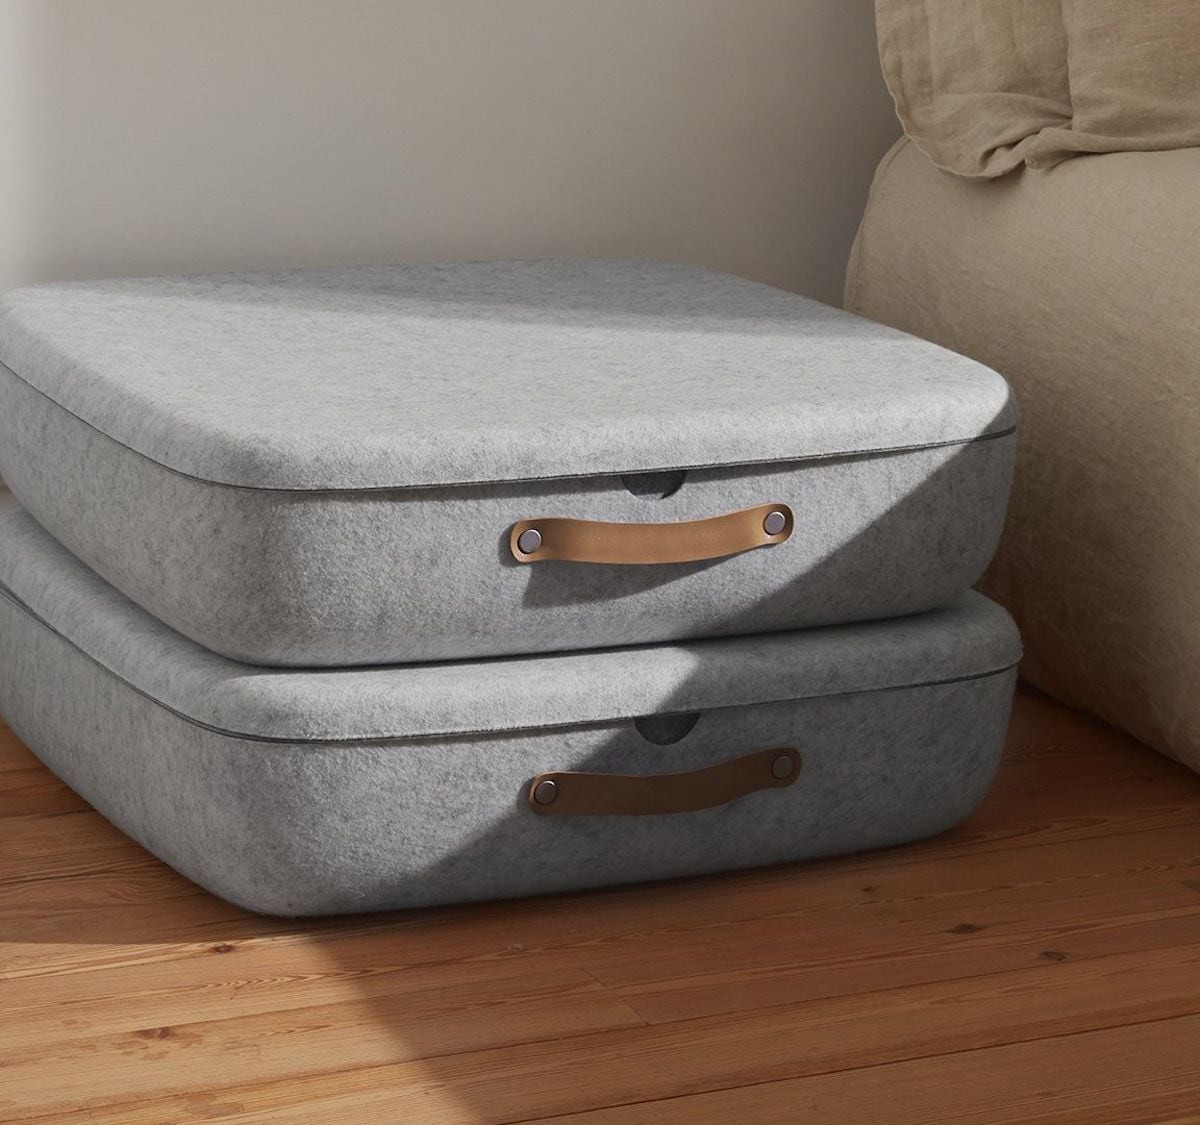 Open Spaces Underbed Storage Felt Bins keep all your less-used items organized